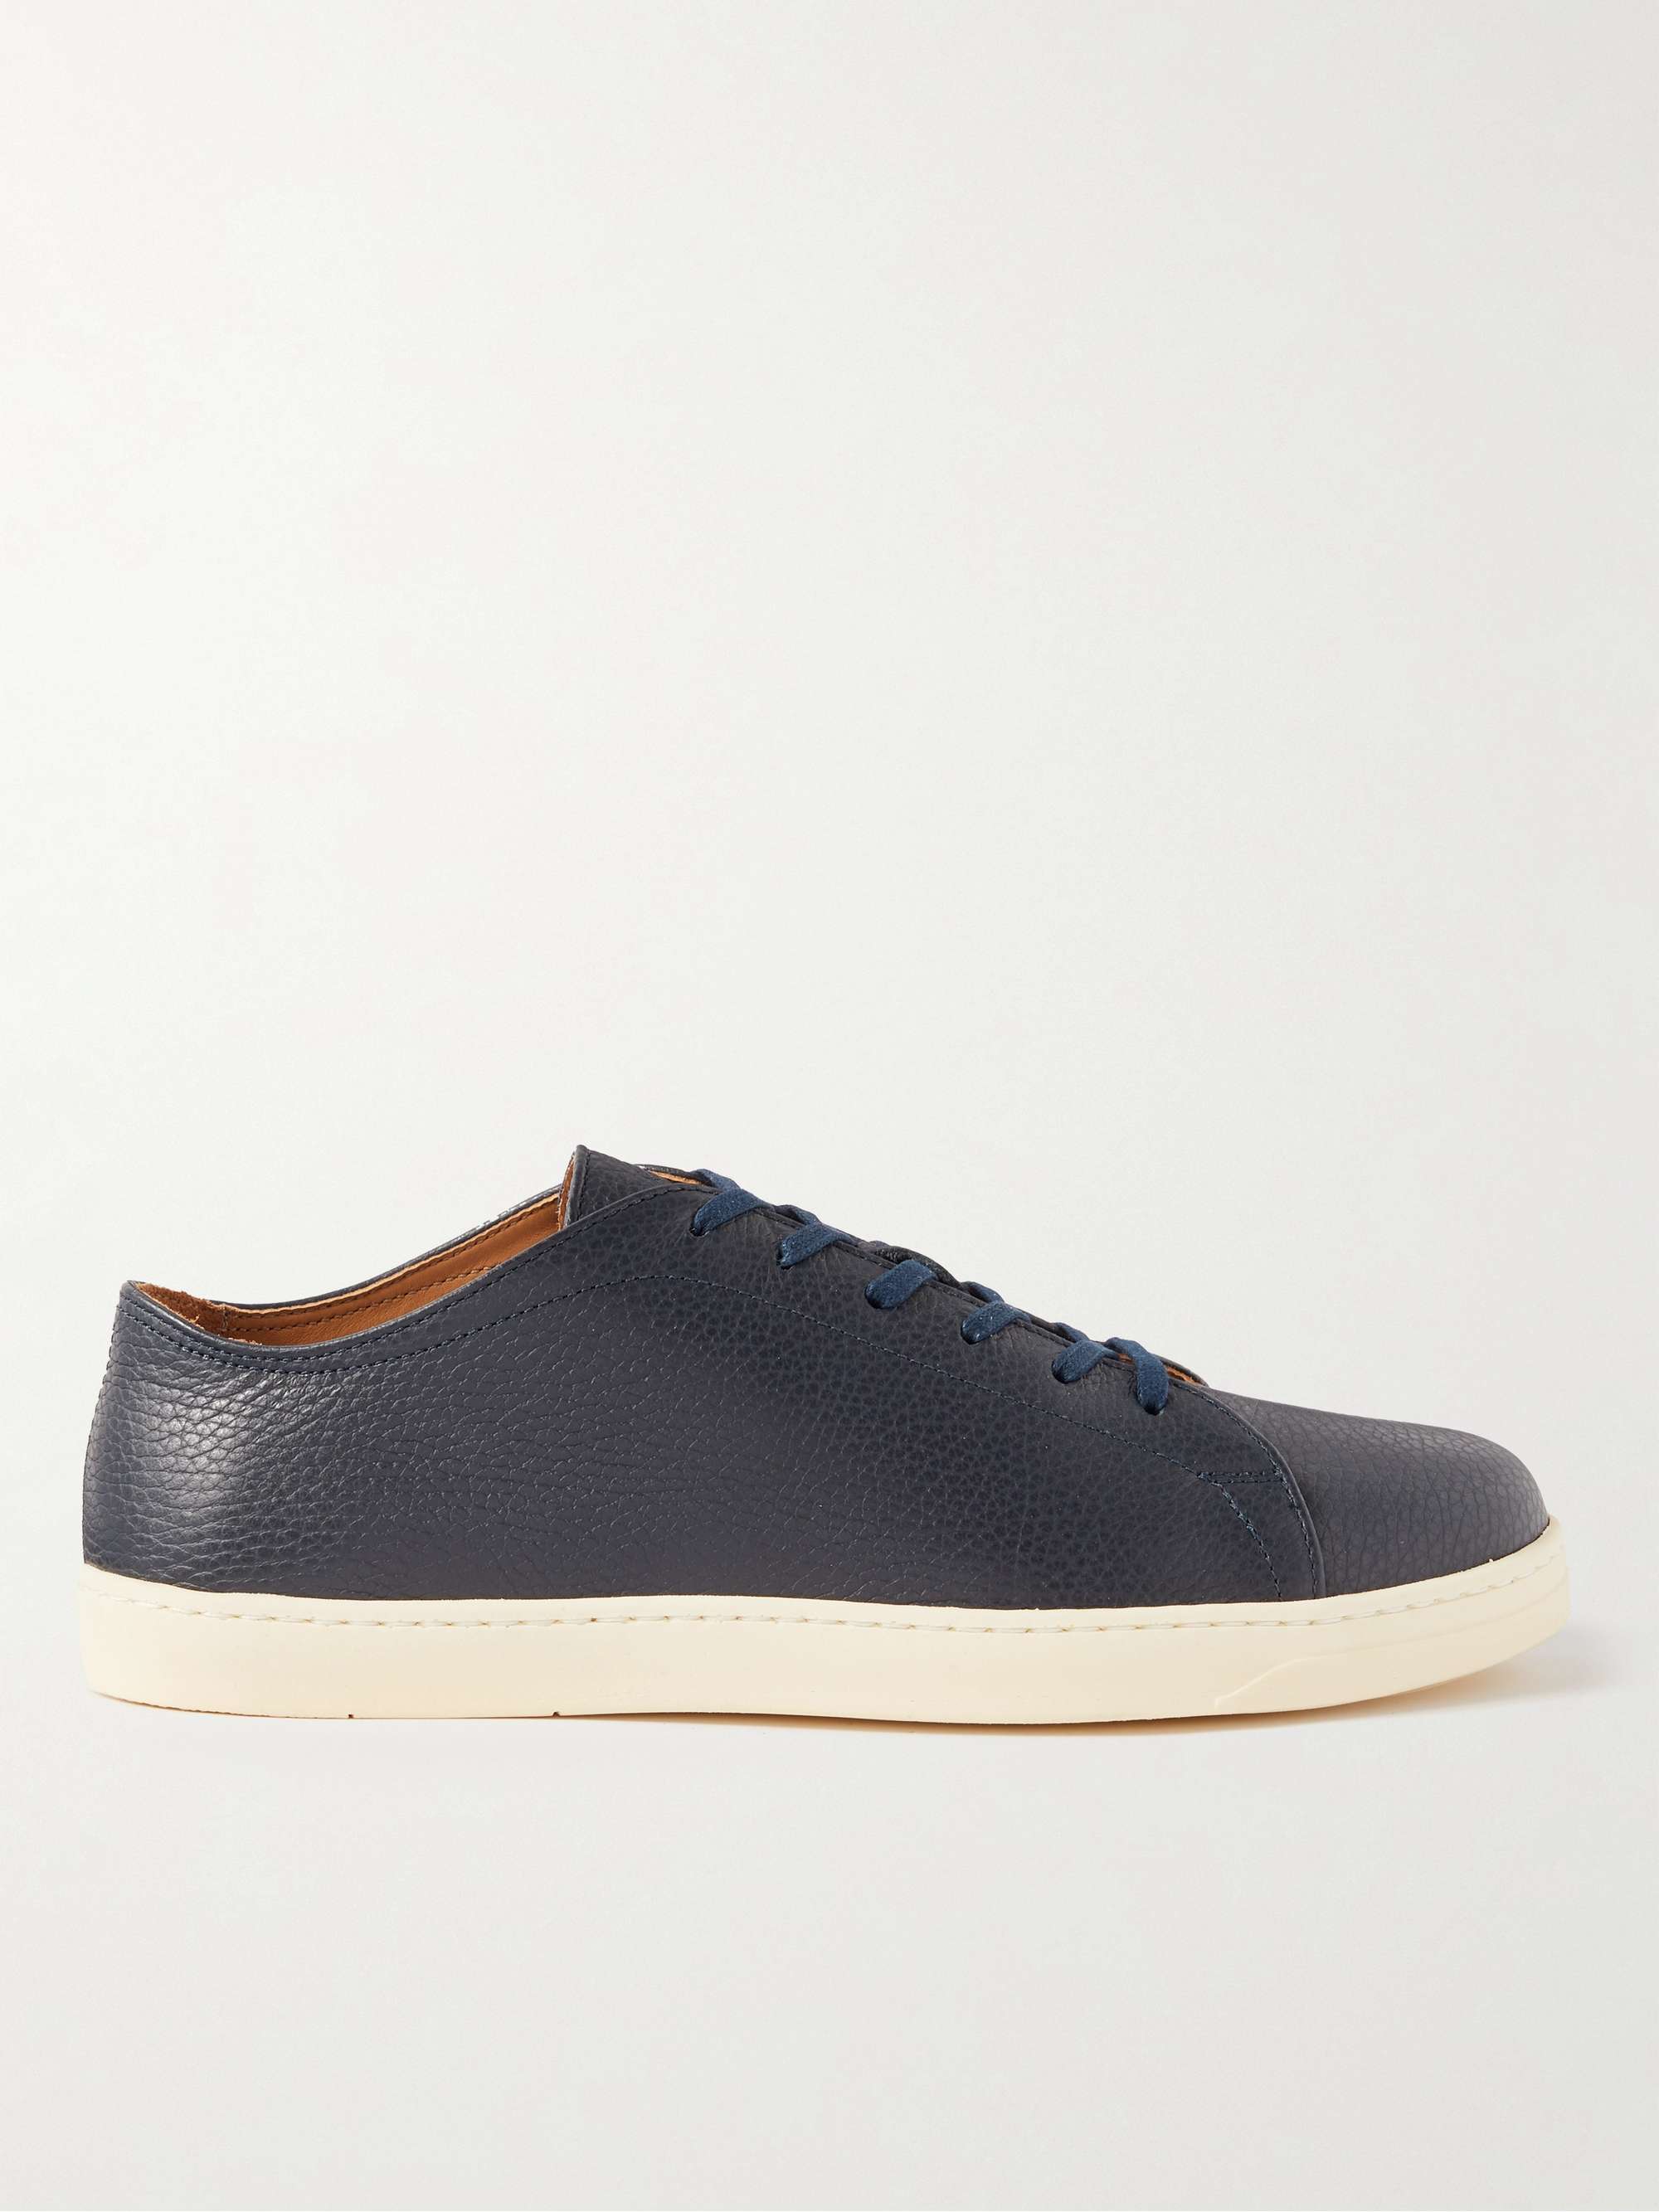 GEORGE CLEVERLEY Full-Grain Leather Sneakers | MR PORTER